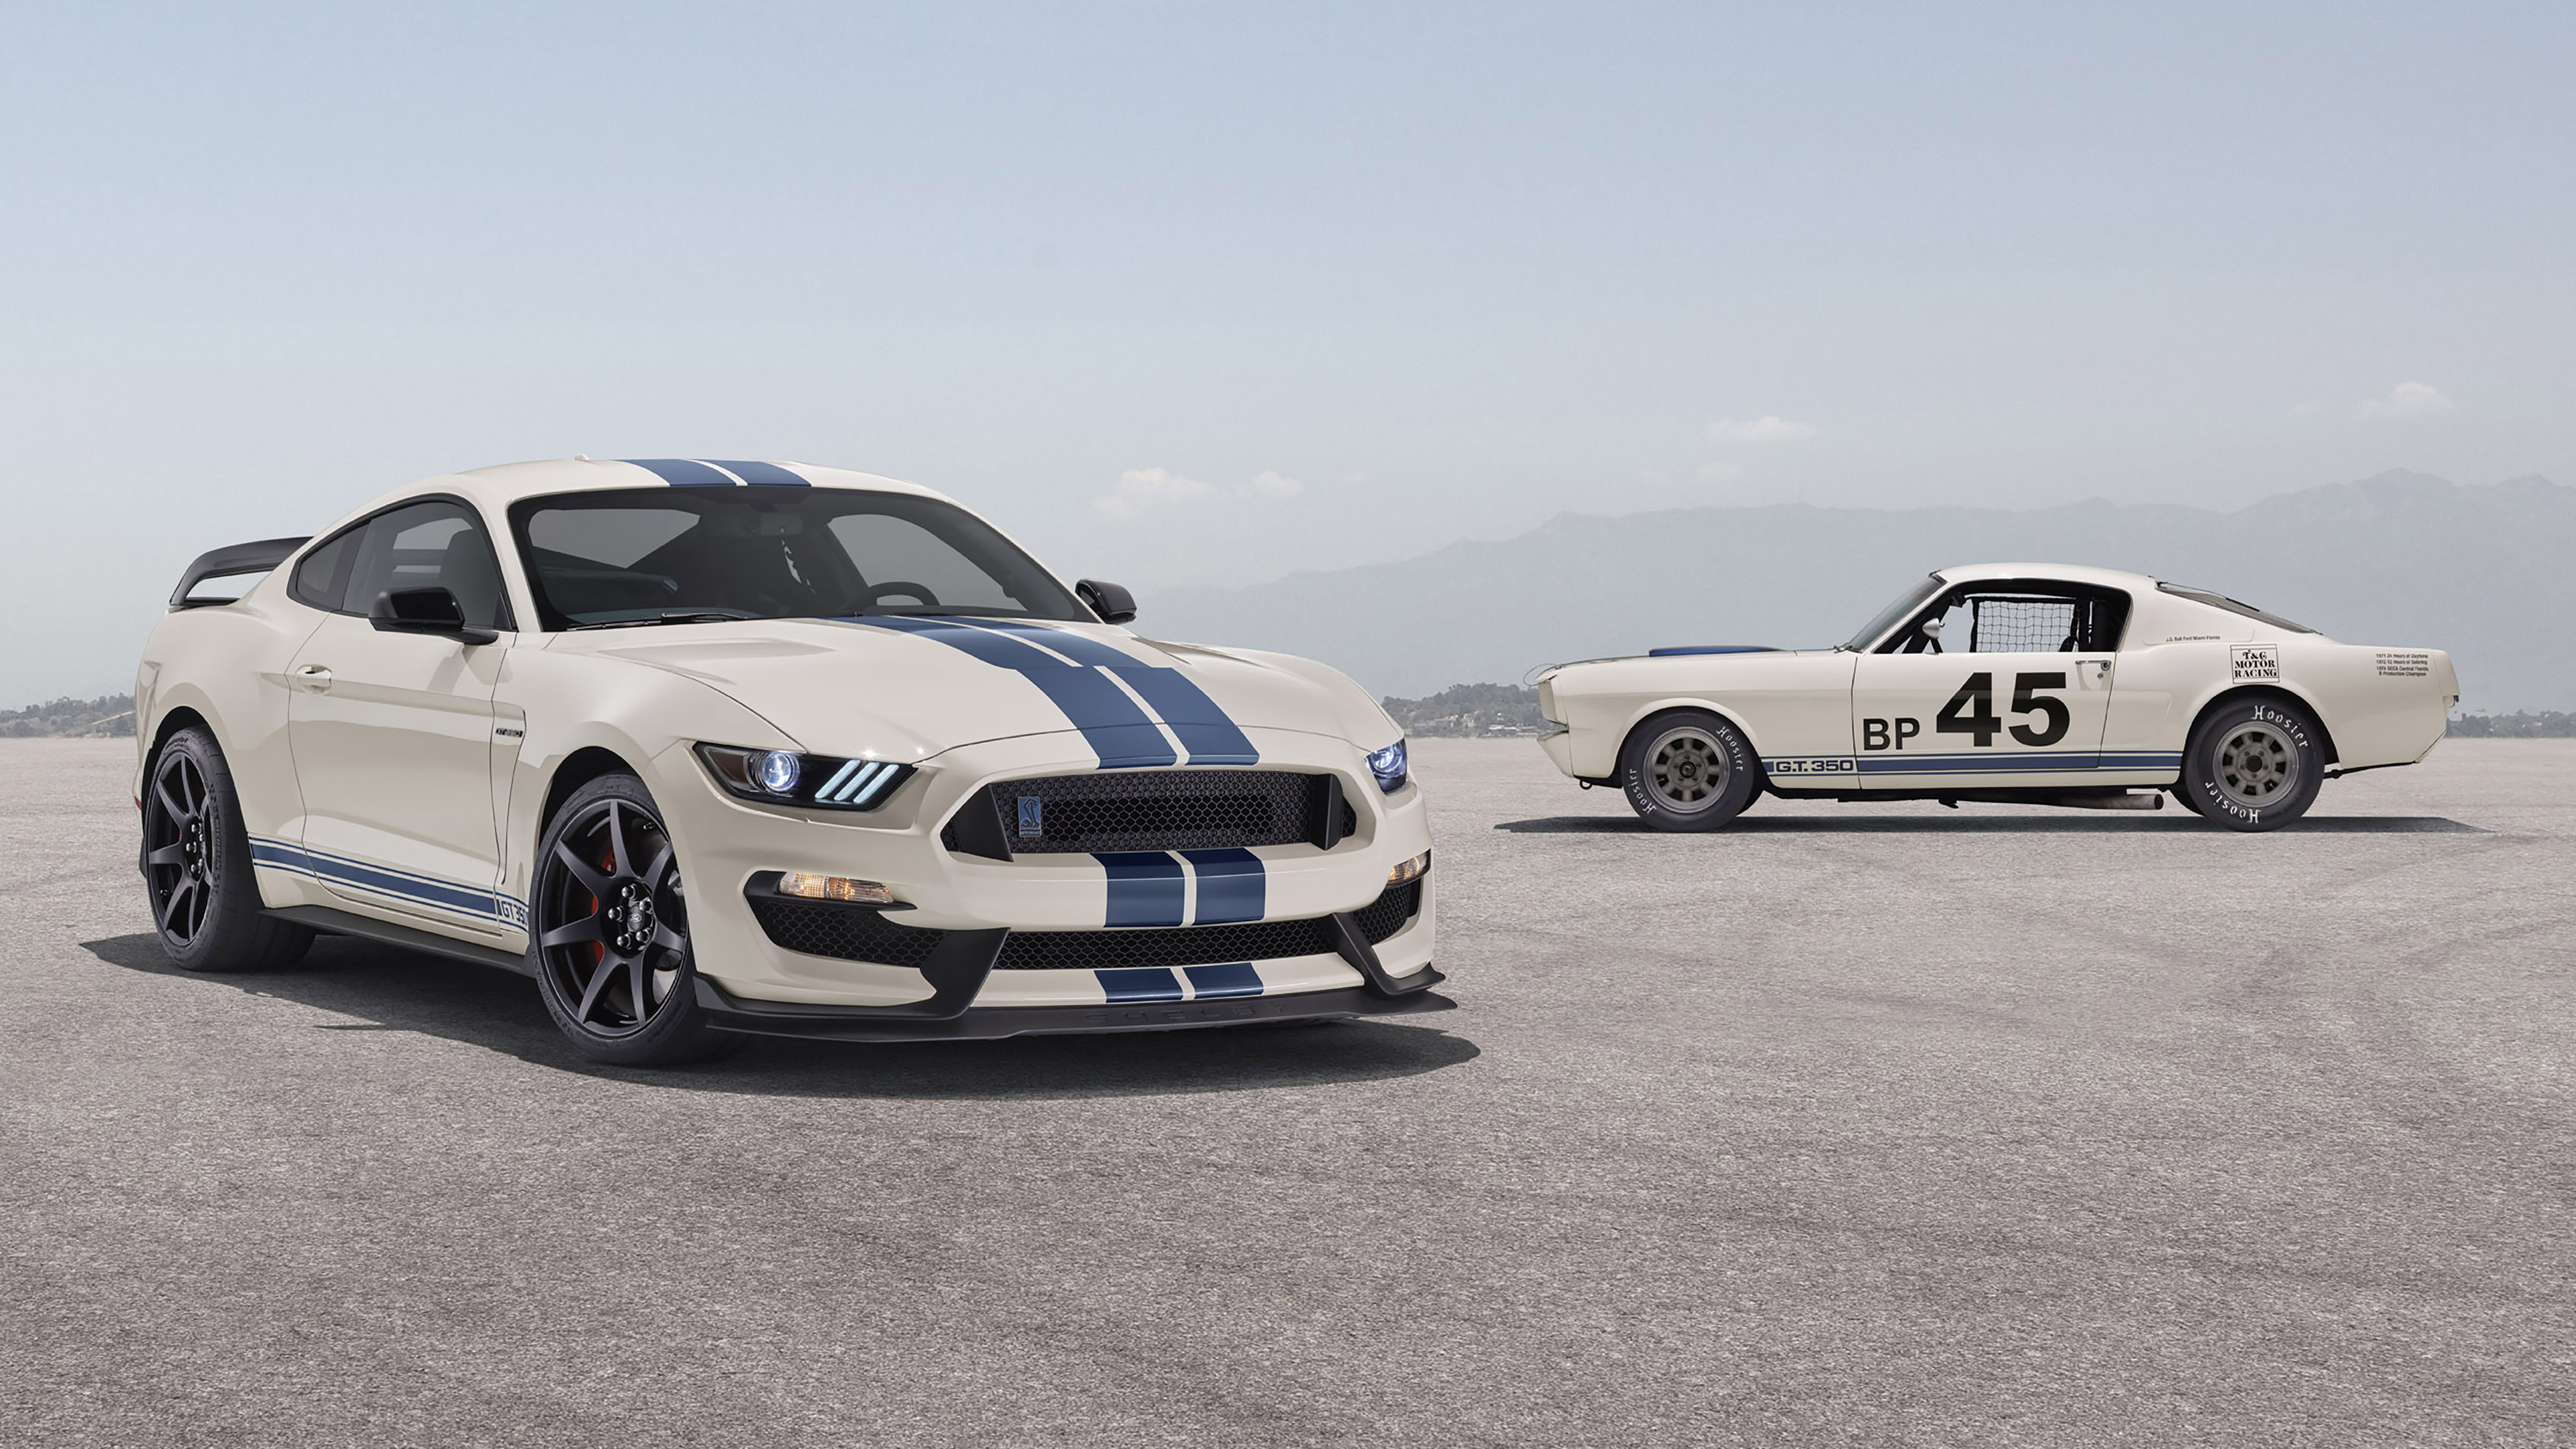 Ford Mustang Shelby Gt350 Heritage Edition Looks The Business